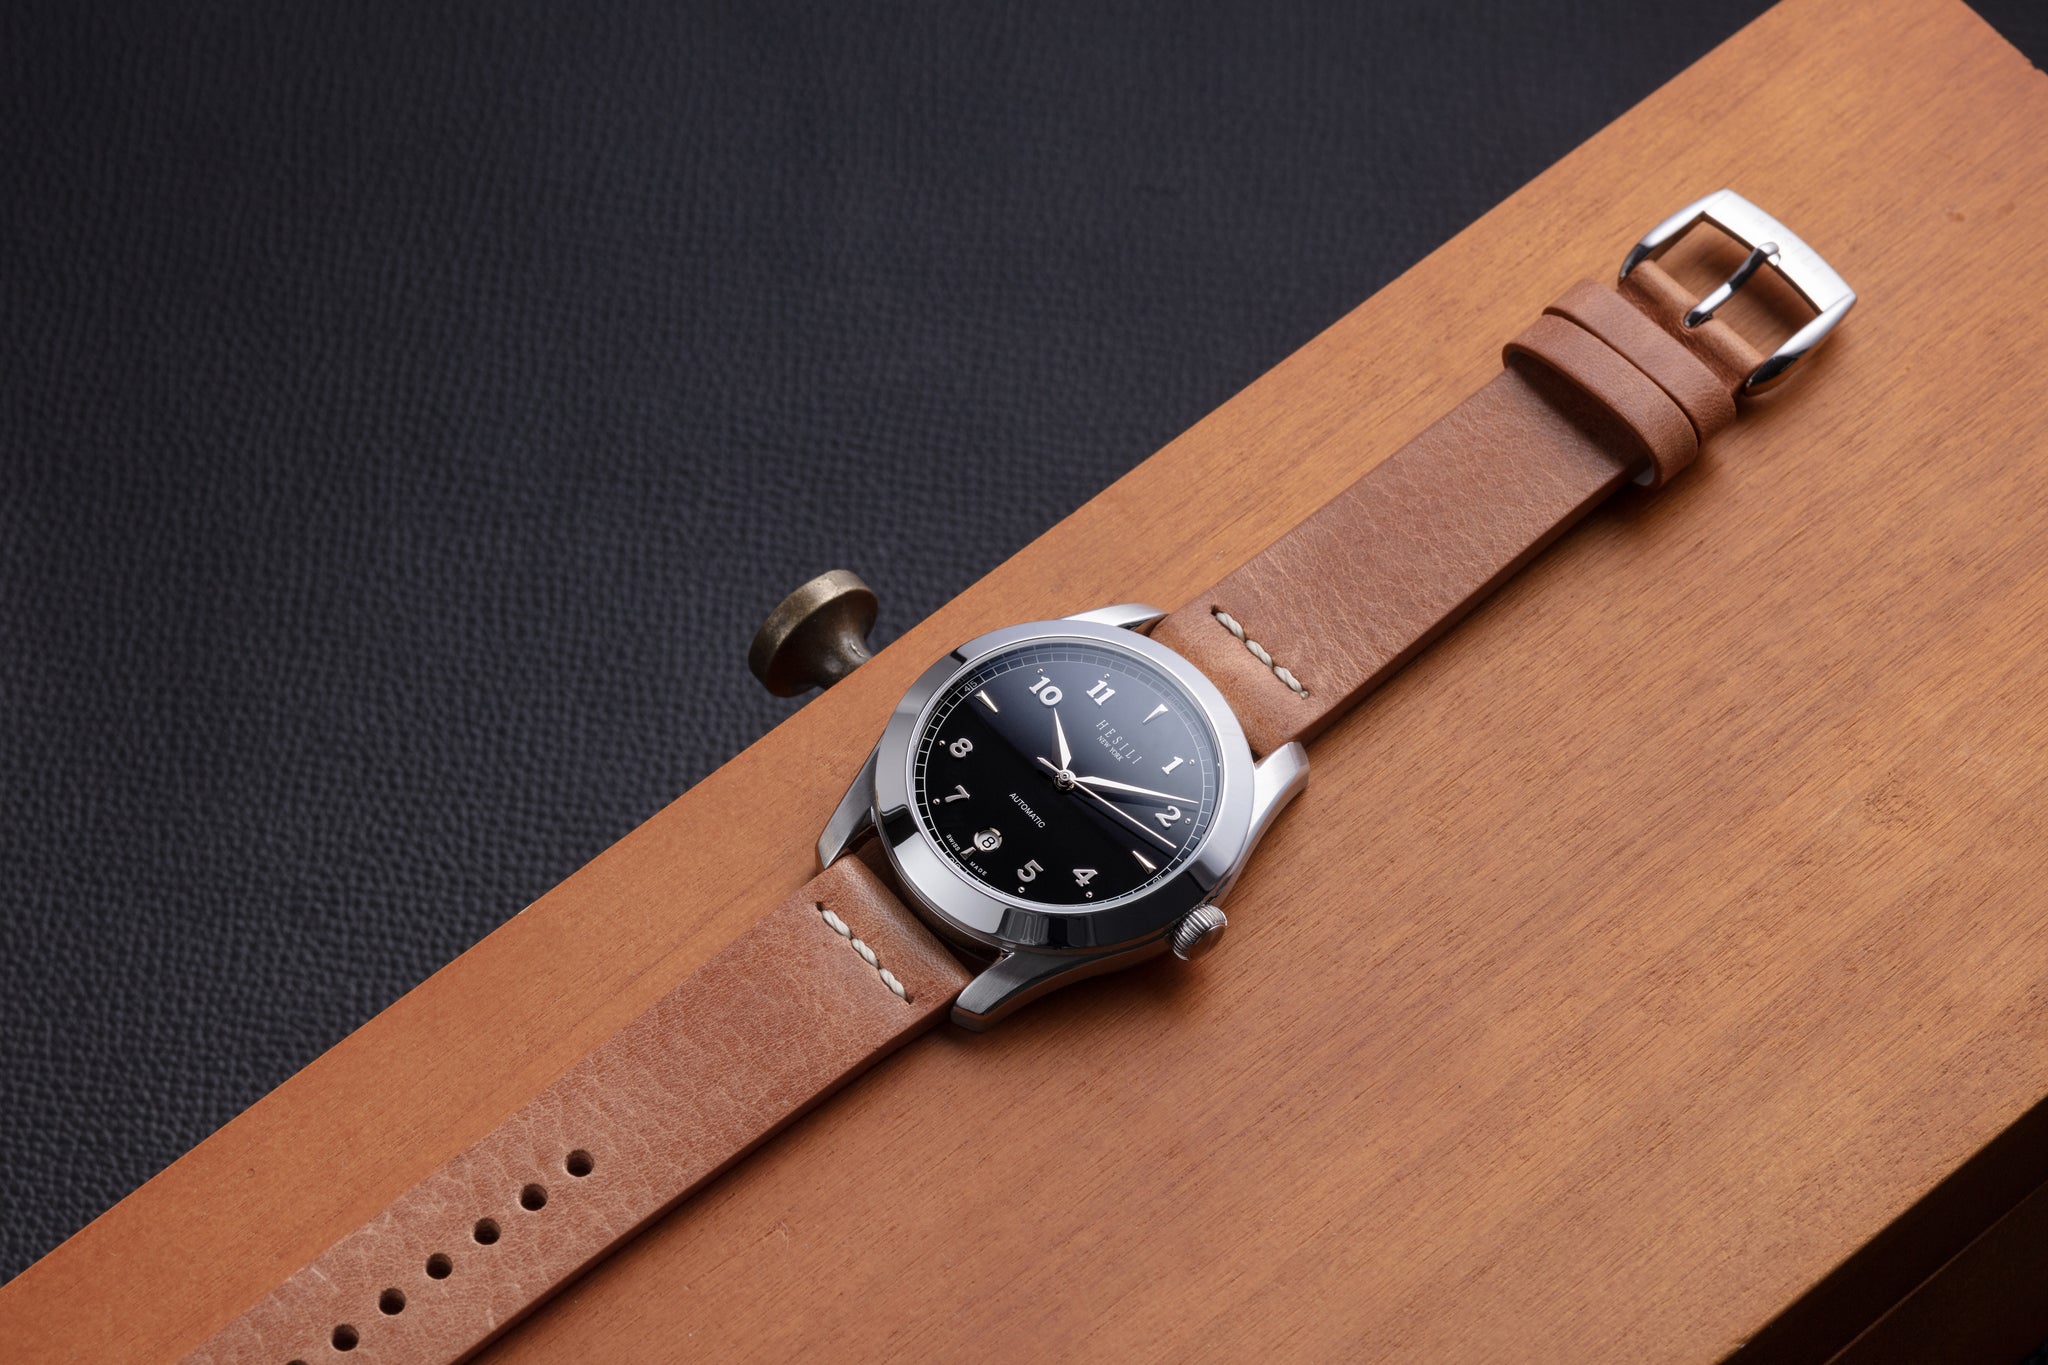 Full-Grain Vegetable-Tanned Italian Leather Straps | Row-Stitch ...